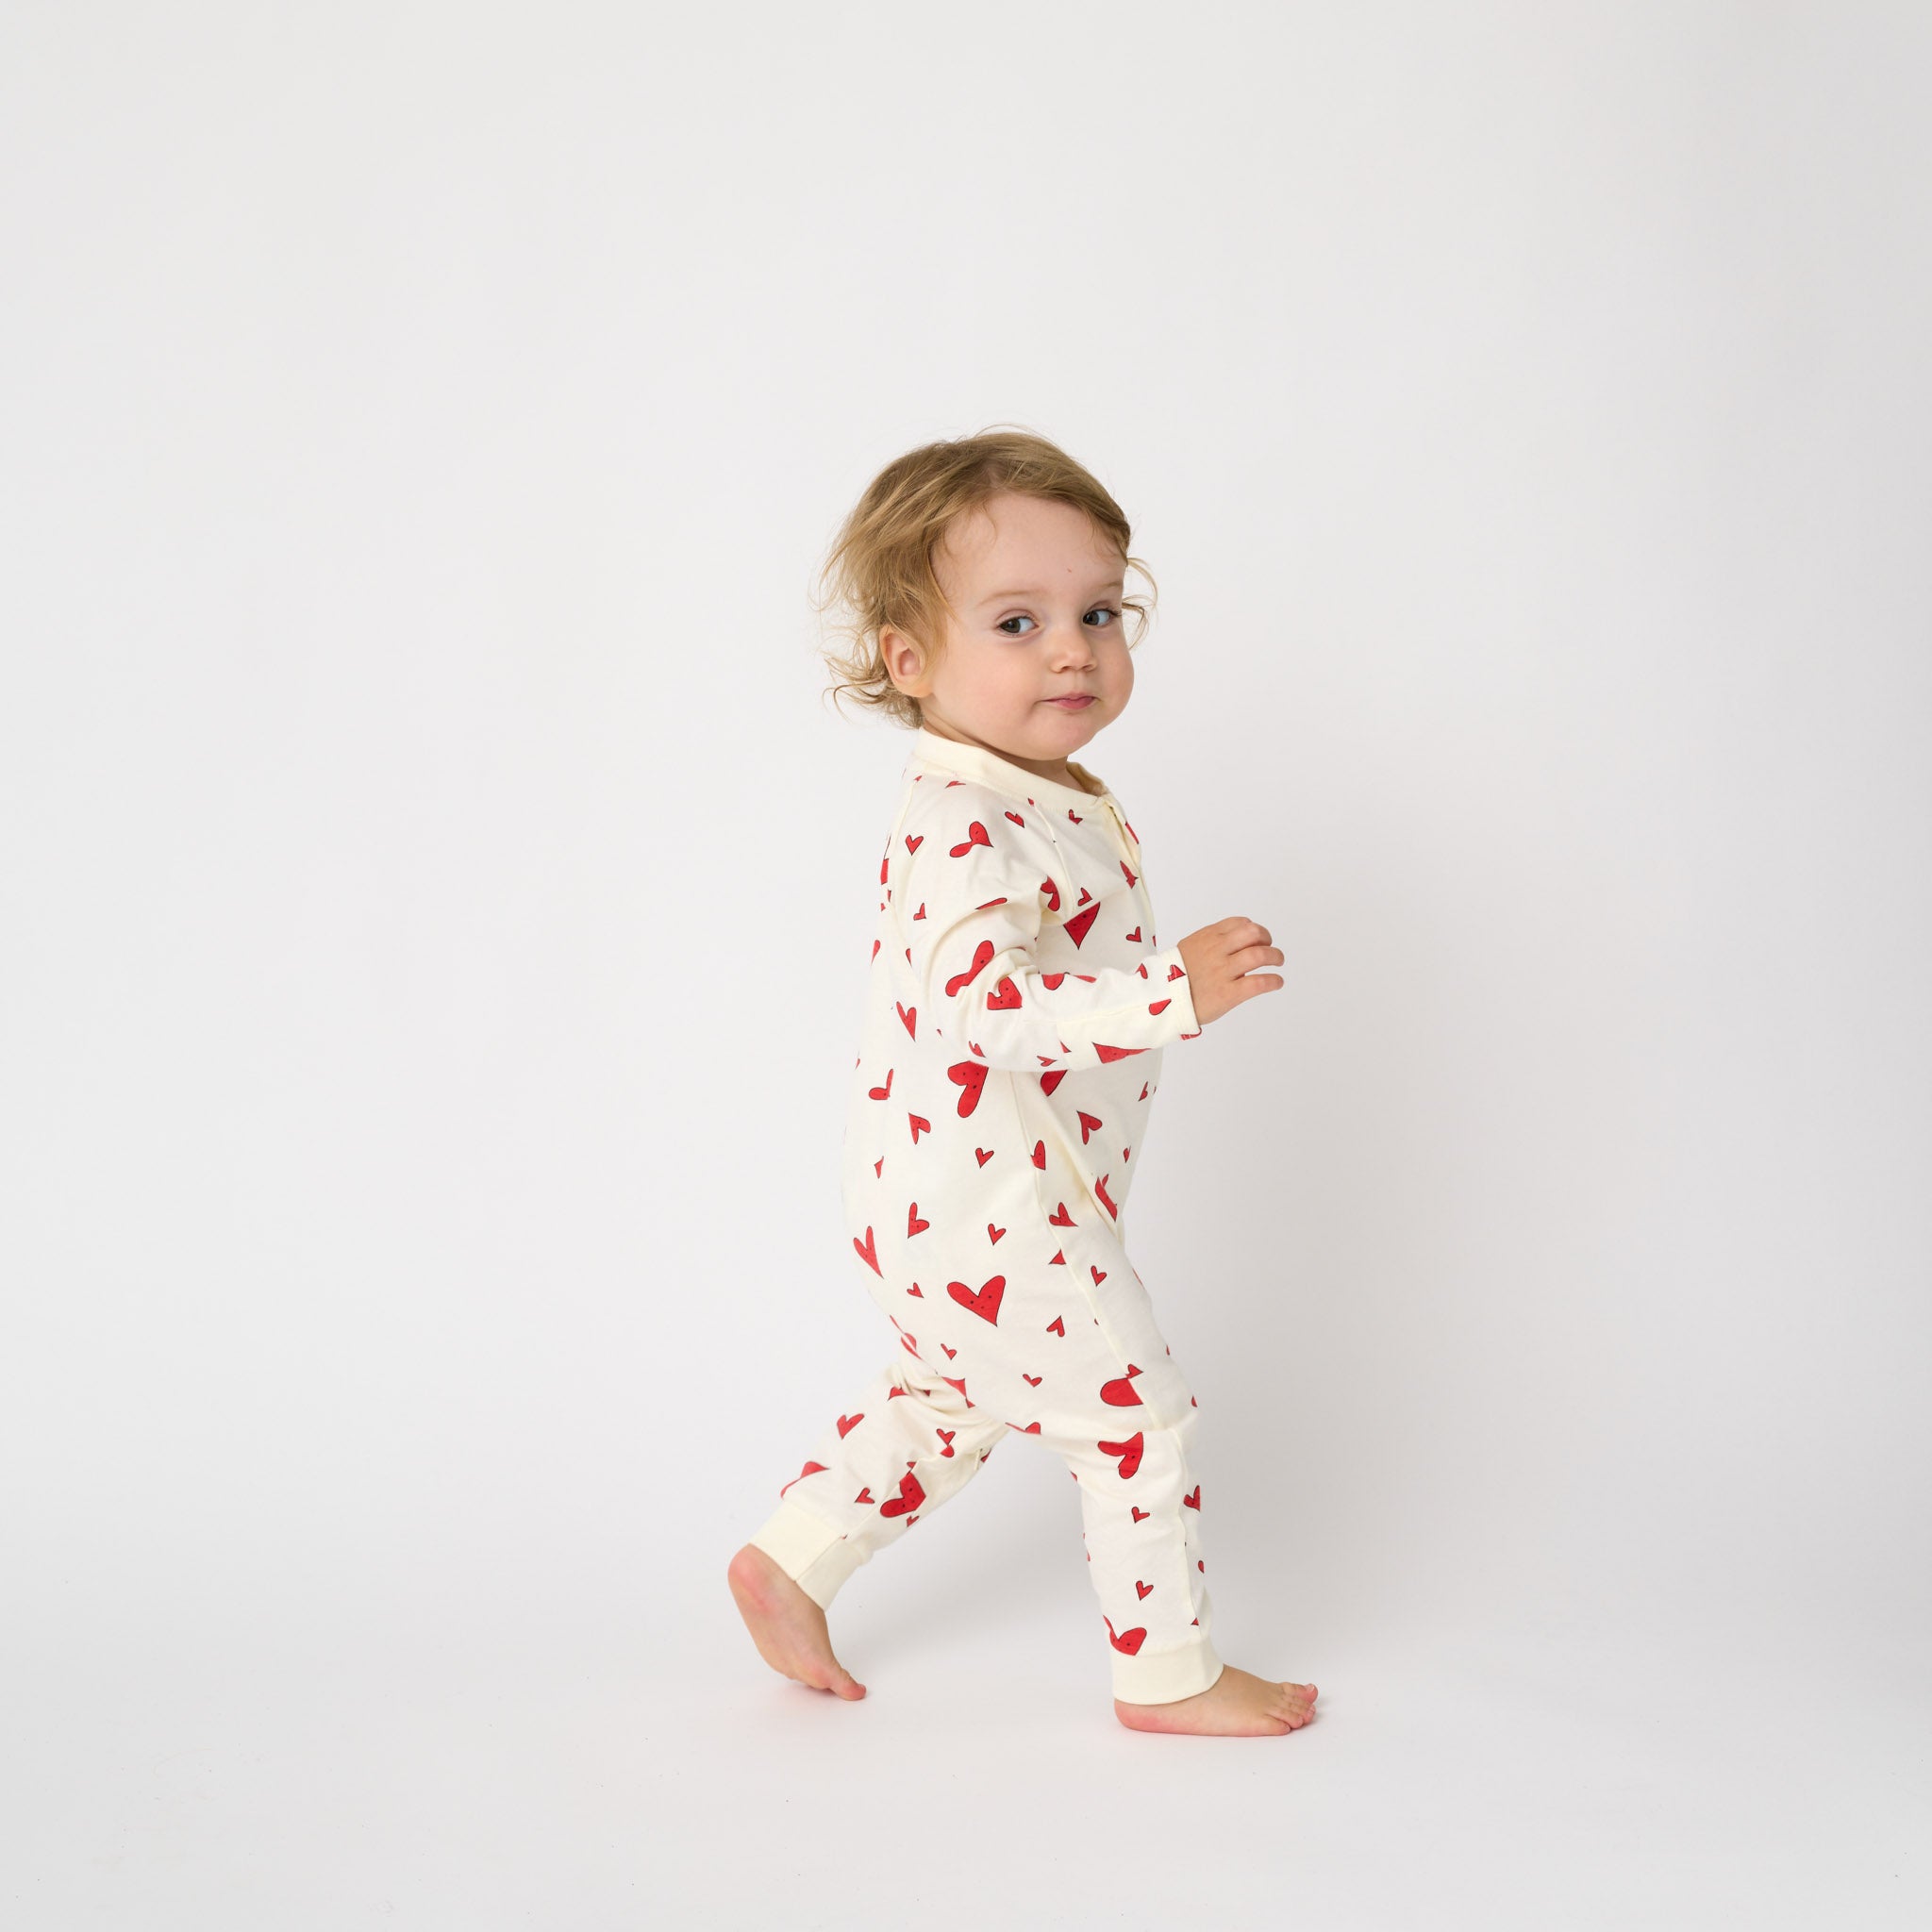 "I got your heart" cream / red baby sleepsuit - GOTS certified 100% organic cotton